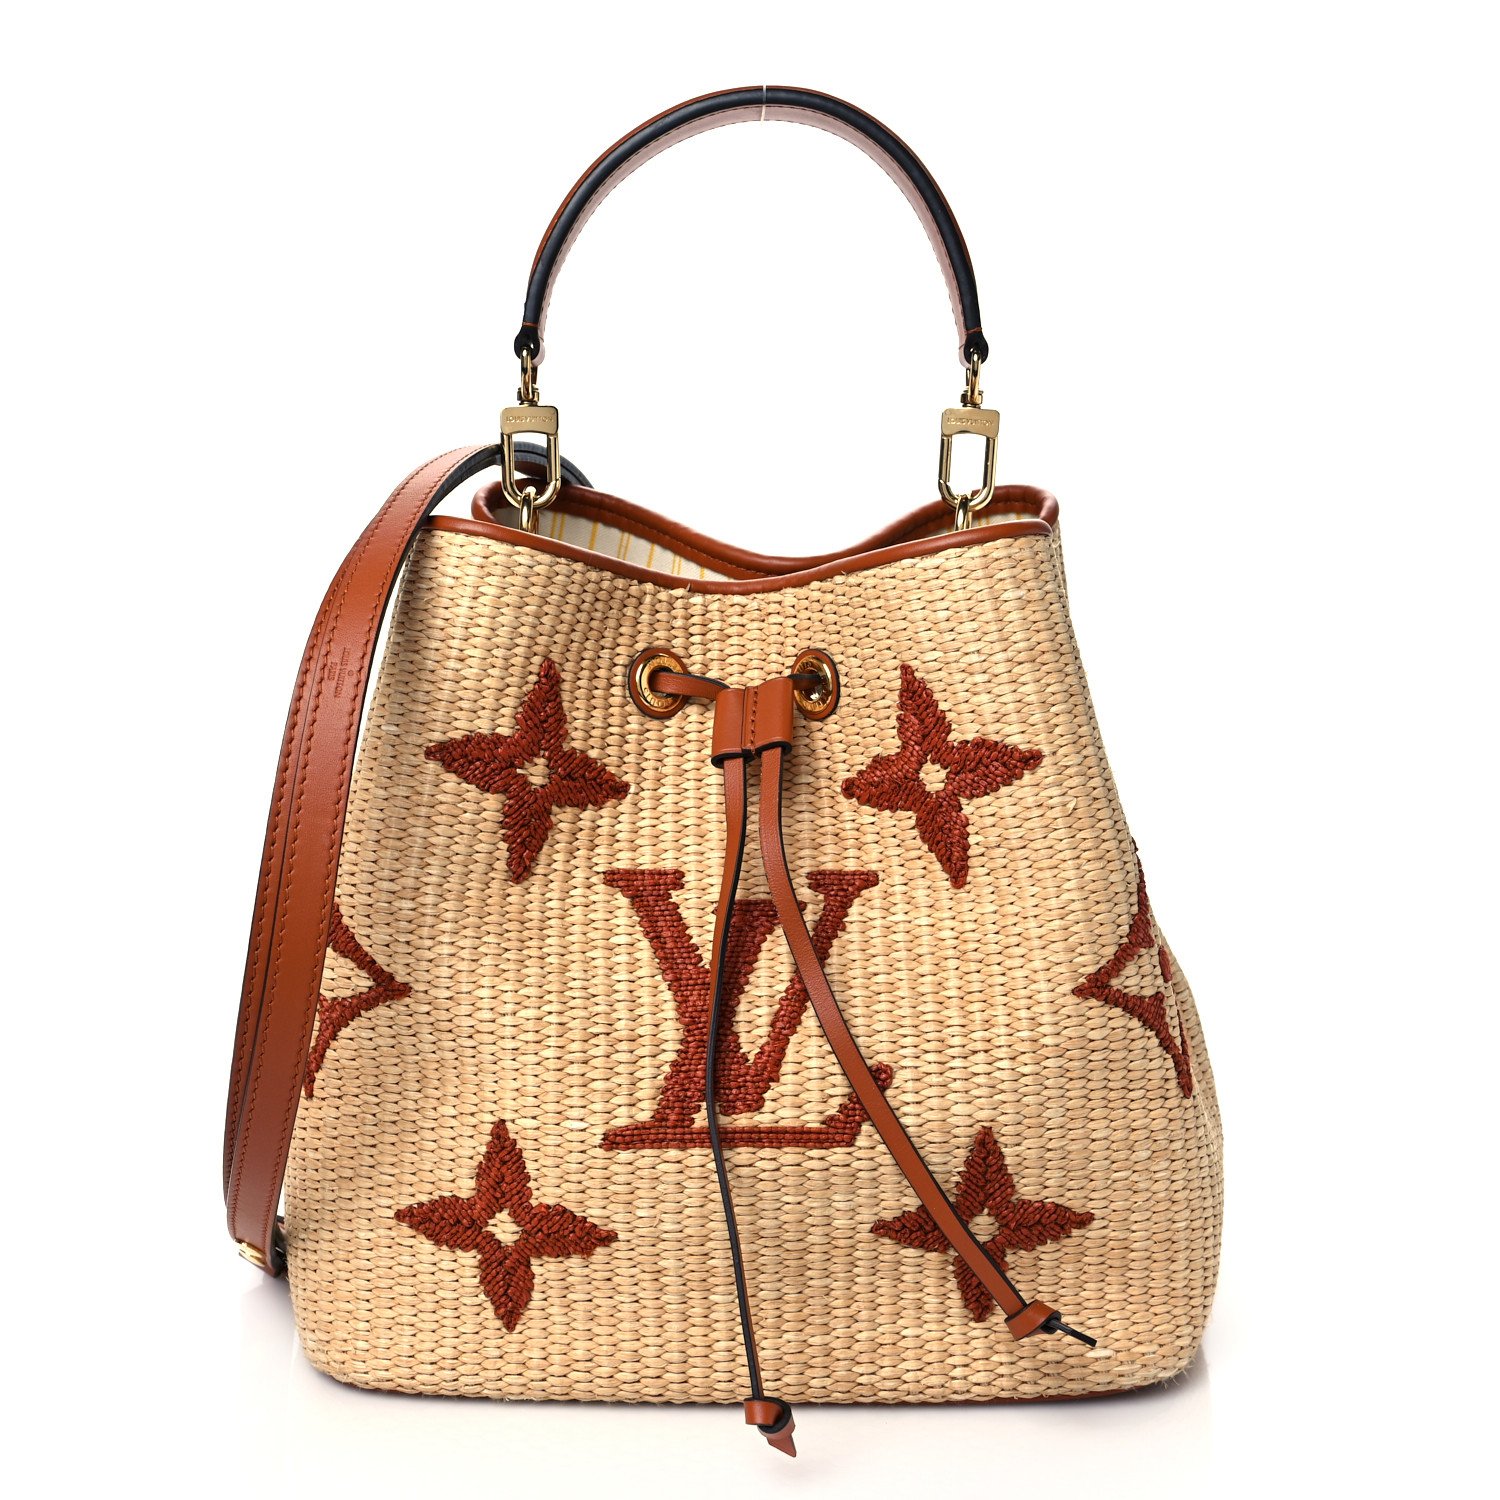 Introducing the Louis Vuitton Wild at Heart Collection - PurseBlog in 2023